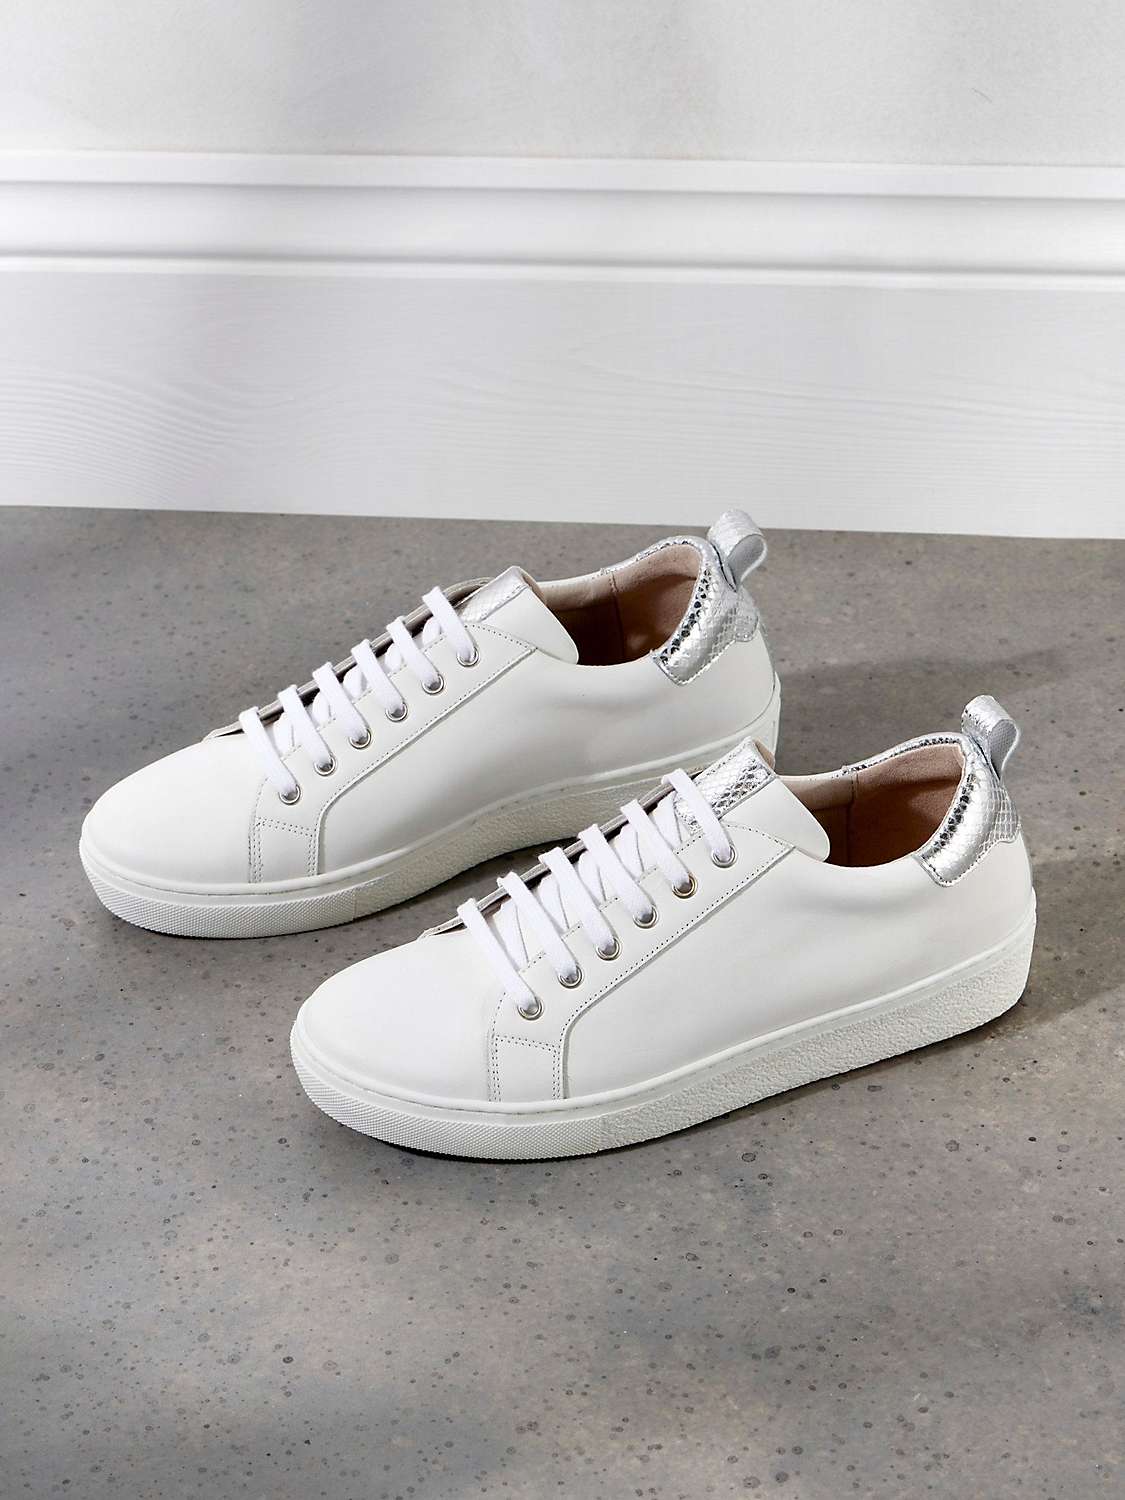 Buy Mint Velvet Leather Lace-Up Trainers, White/Silver Online at johnlewis.com